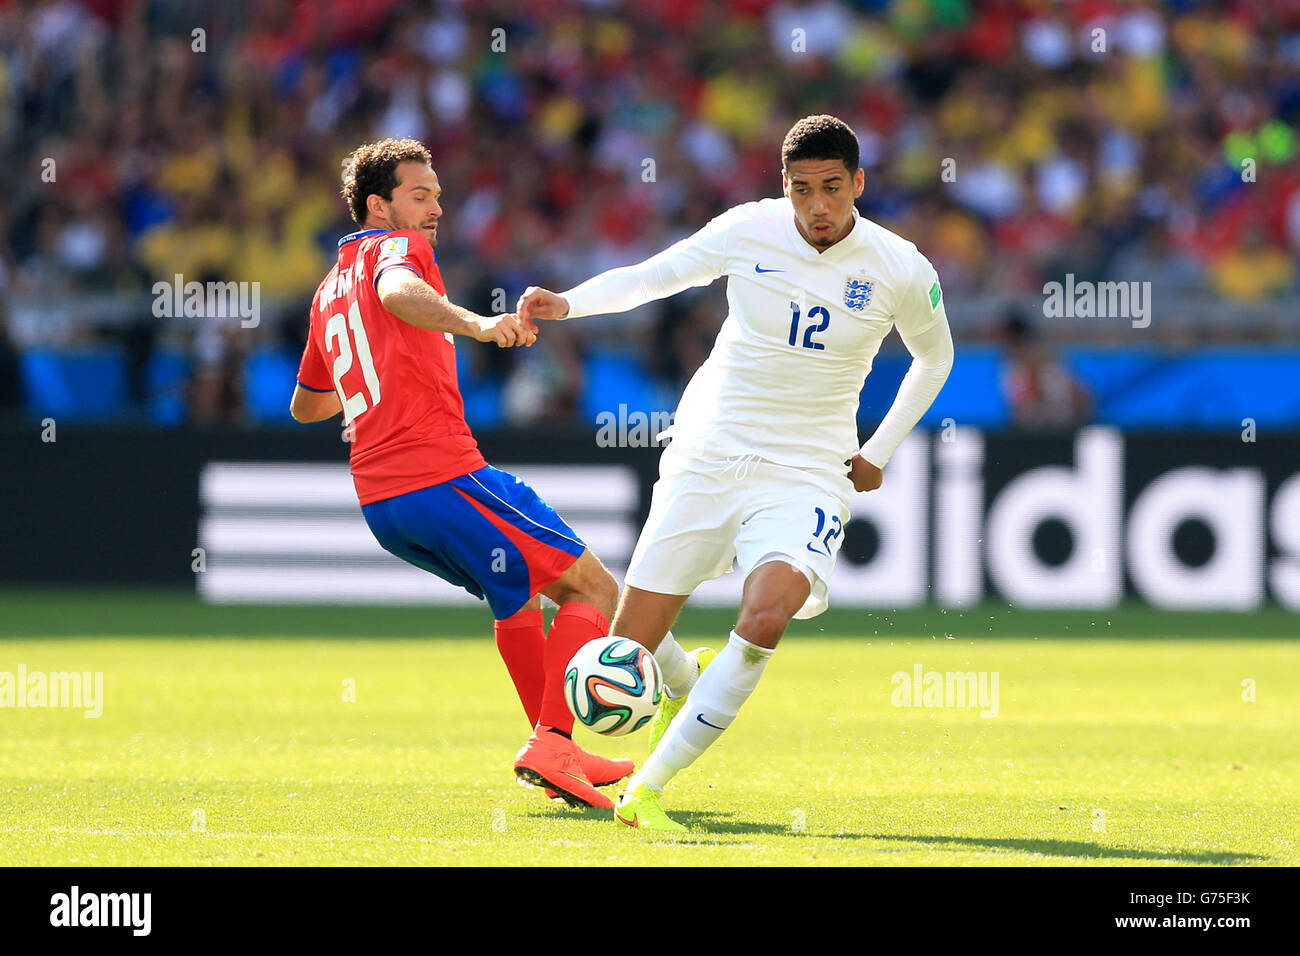 England's Chris Smalling (right) and Costa Rica's Marco Urena battle for the ball during the FIFA World Cup, Group D match at the Estadio Mineirao, Belo Horizonte, Brazil. Stock Photo